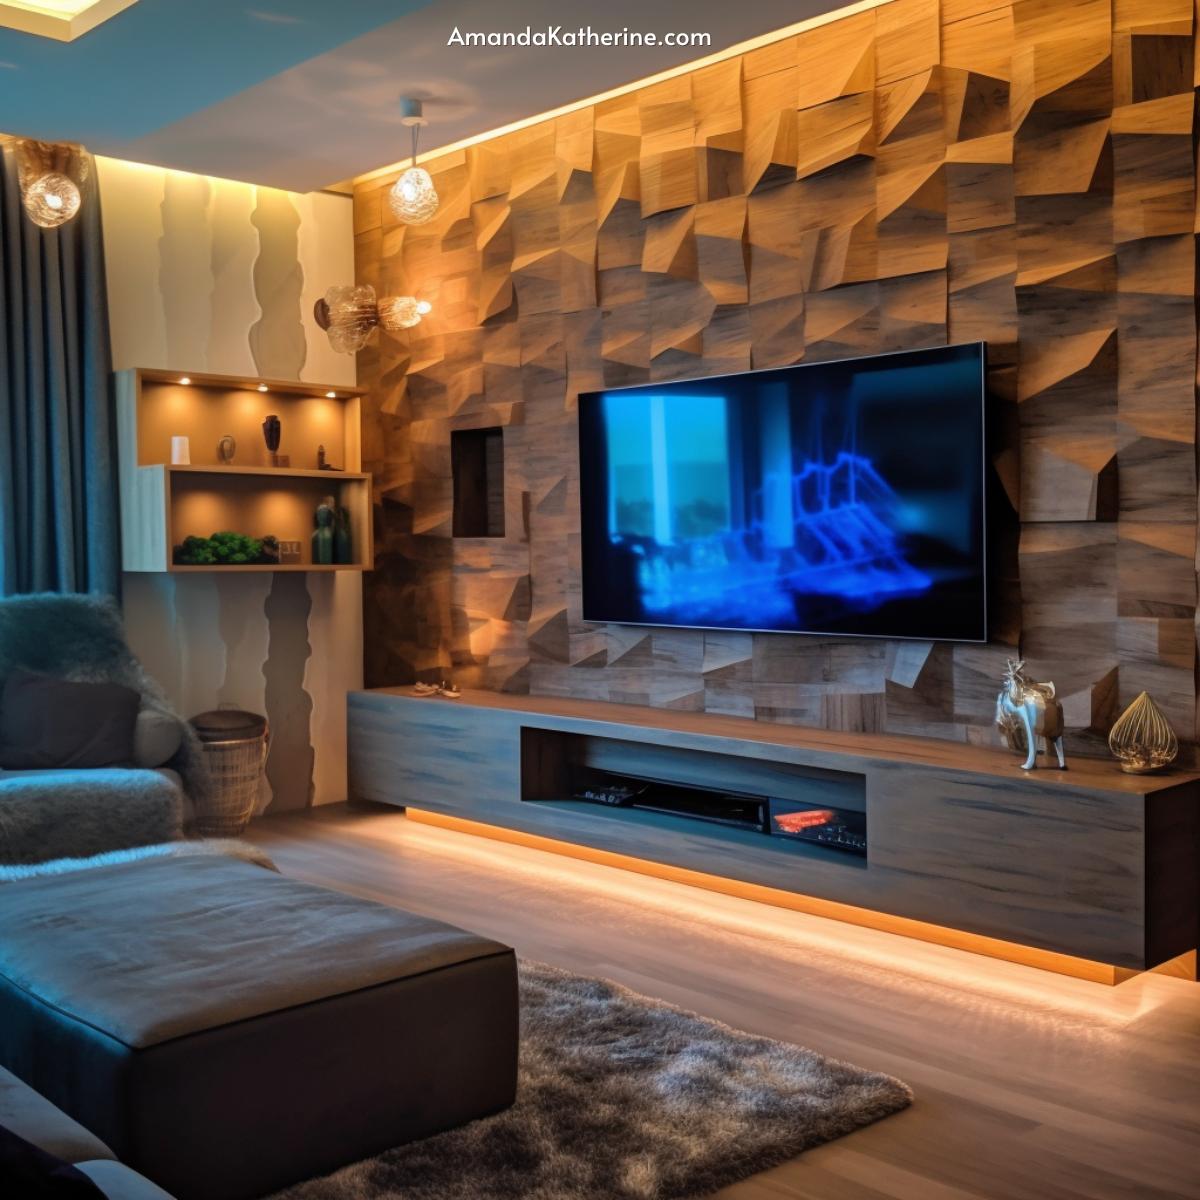 31 Stunning Fireplace Wall Ideas with a TV for Your Living Room | small living room idea